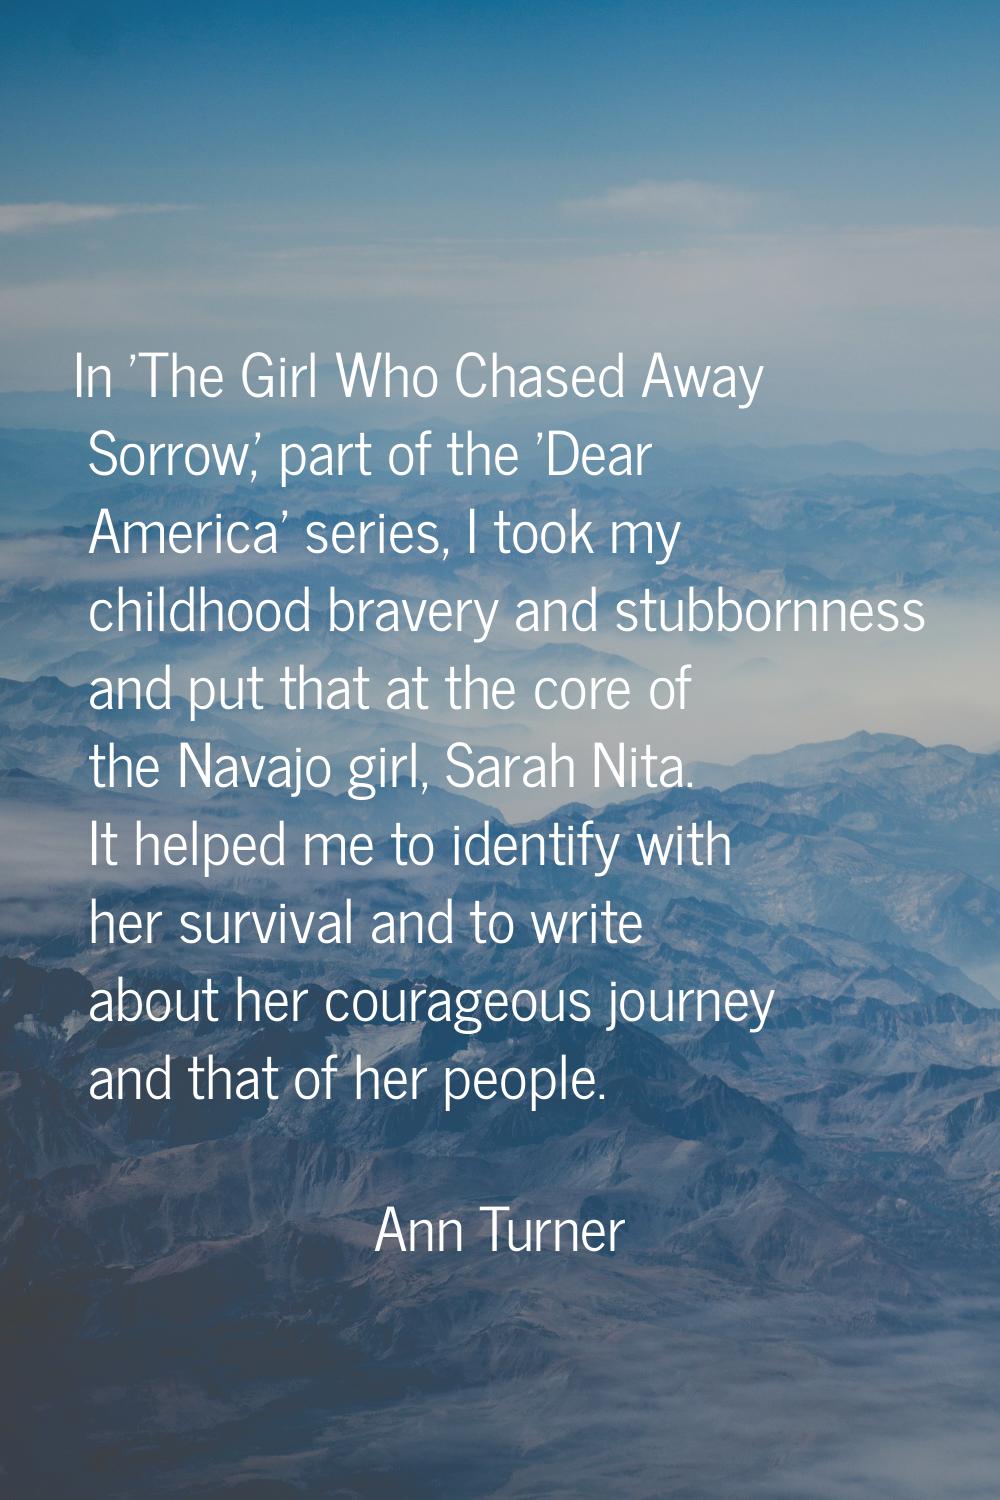 In 'The Girl Who Chased Away Sorrow,' part of the 'Dear America' series, I took my childhood braver